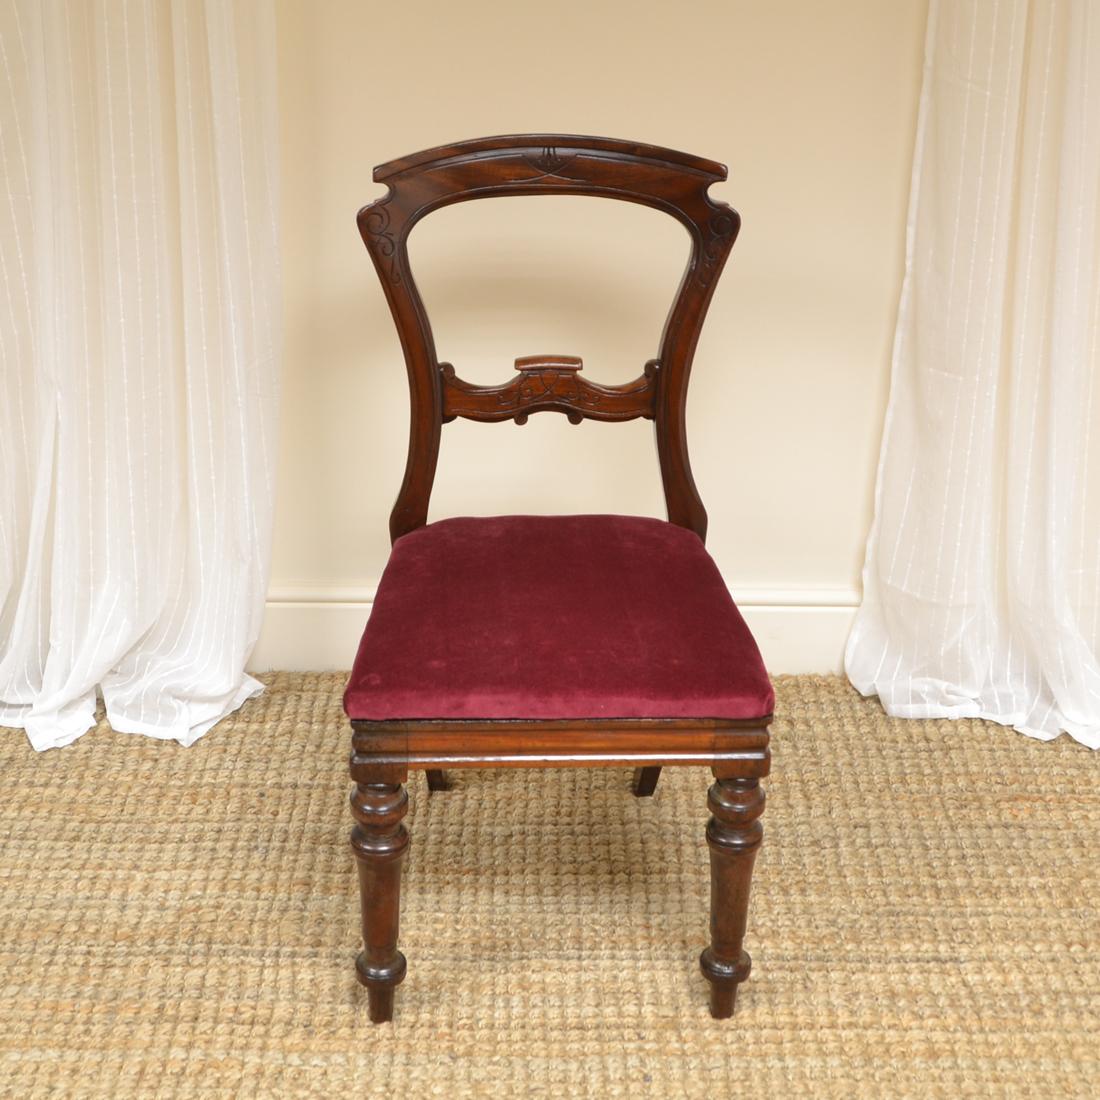 Set of 10 Victorian antique mahogany dining chairs
This quality set of 10 Victorian antique mahogany dining chairs, are stamped by the renowned cabinet makers J Reilly and date from ca. 1870. They each have fine carved shaped backs, splayed back